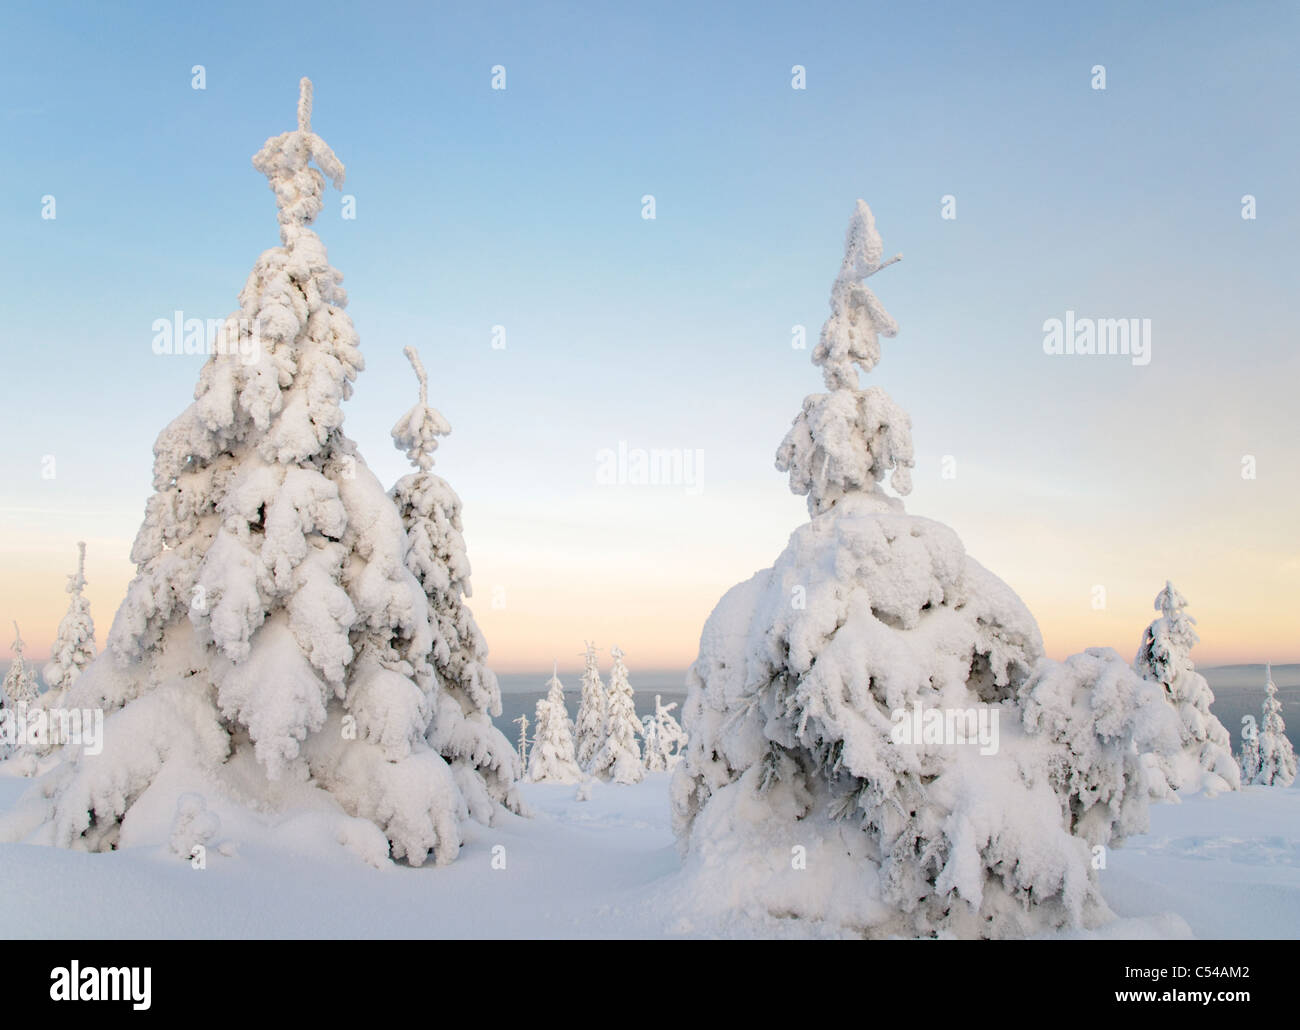 Snowy winter landscape at dusk on the 'Acker', the longest mountain range in the Upper Harz, Harz National Park, Germany Stock Photo